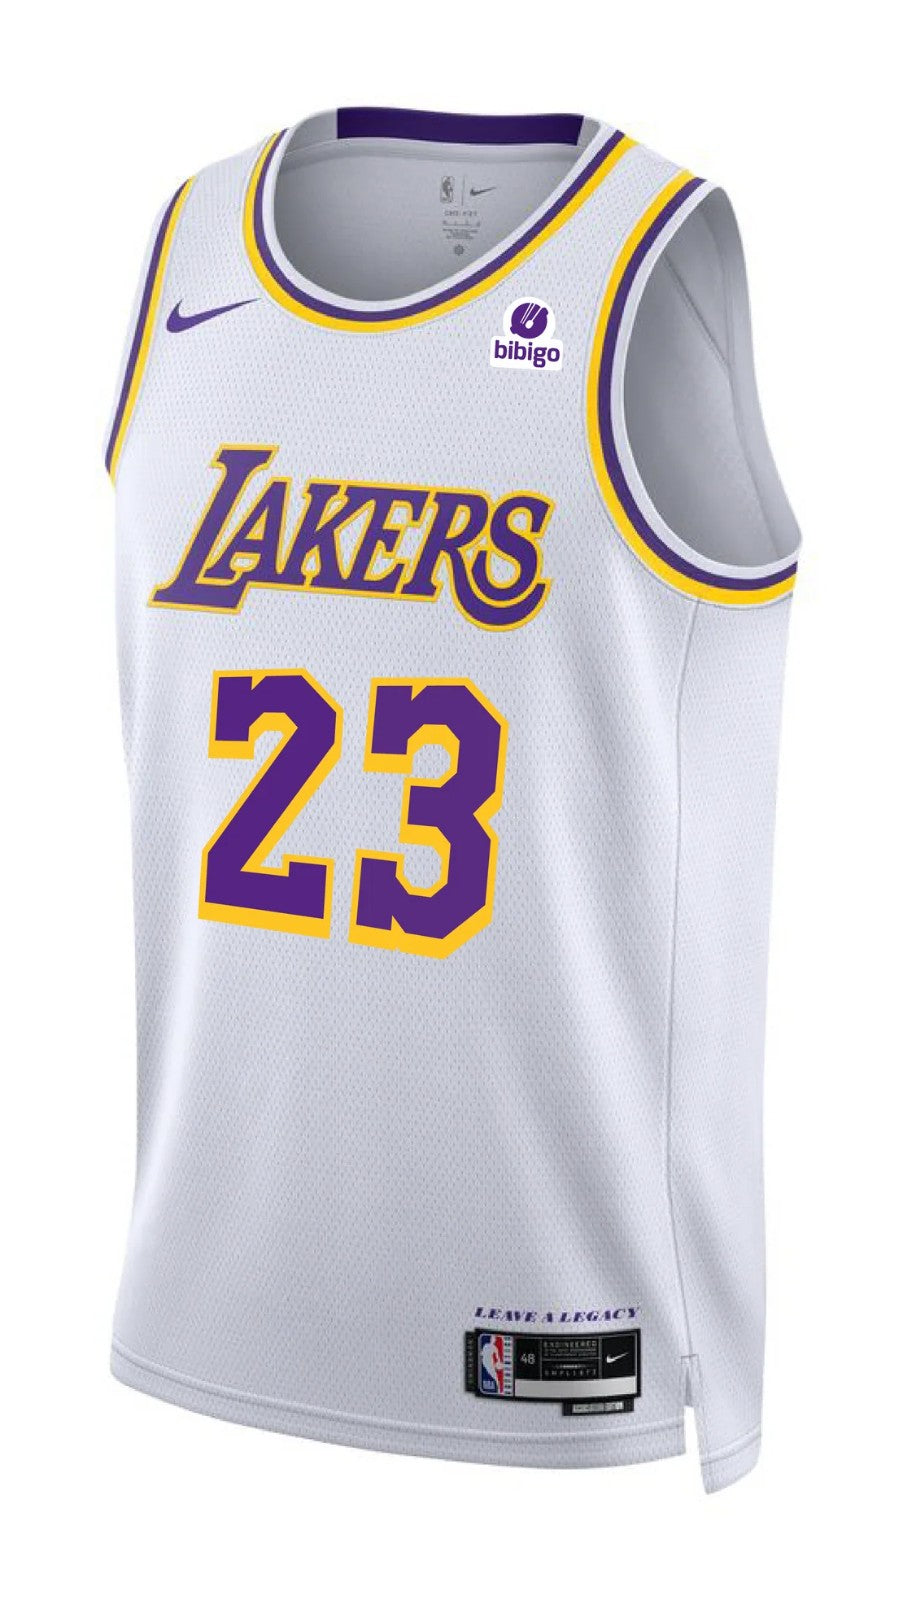 LOS ANGELES LAKERS ASSOCIATION JERSEY 23/24